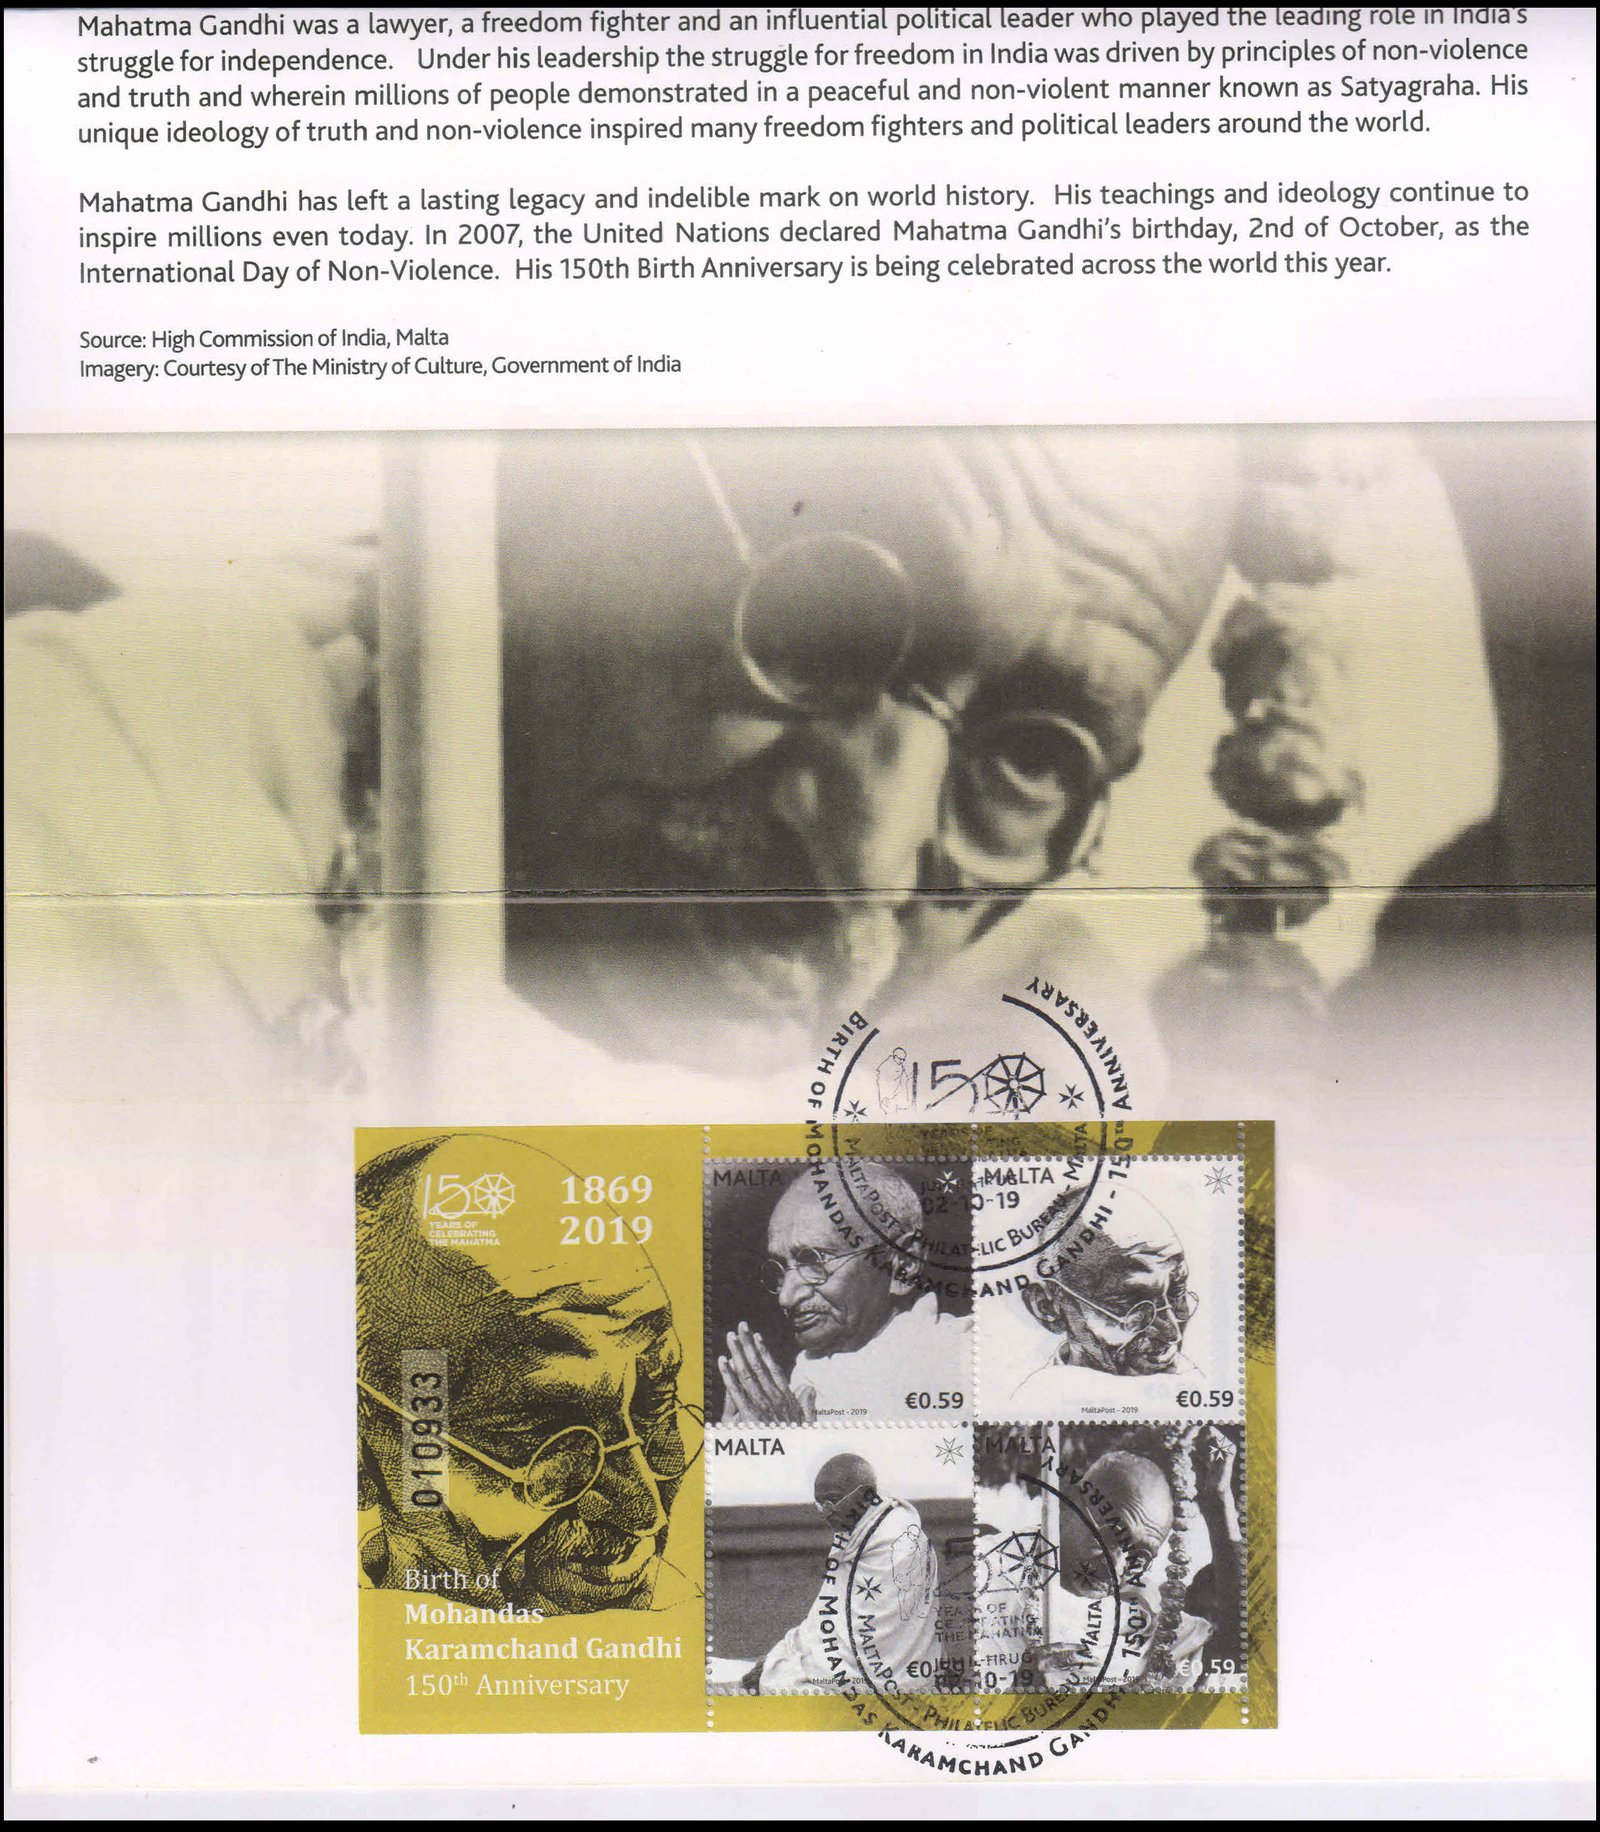 MALTA 2019, 150th Birth Anniv. of Mahatma Gandhi, Presentation incl. Miniature Sheet & First Day Cancellation, Collectable Pack